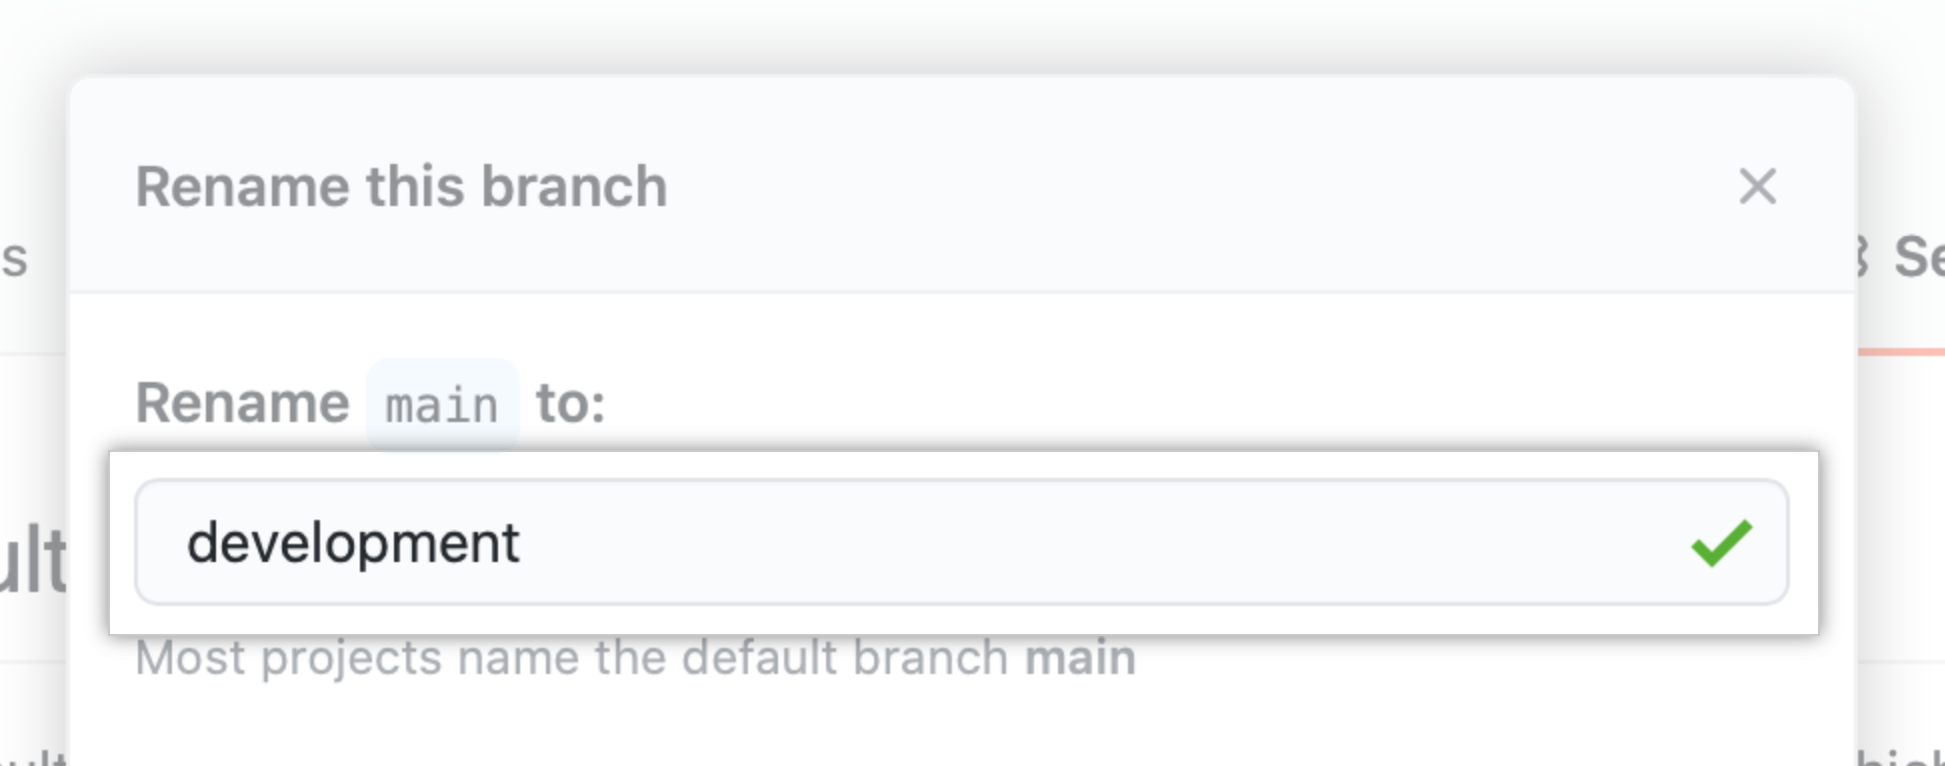 Text field for typing new branch name